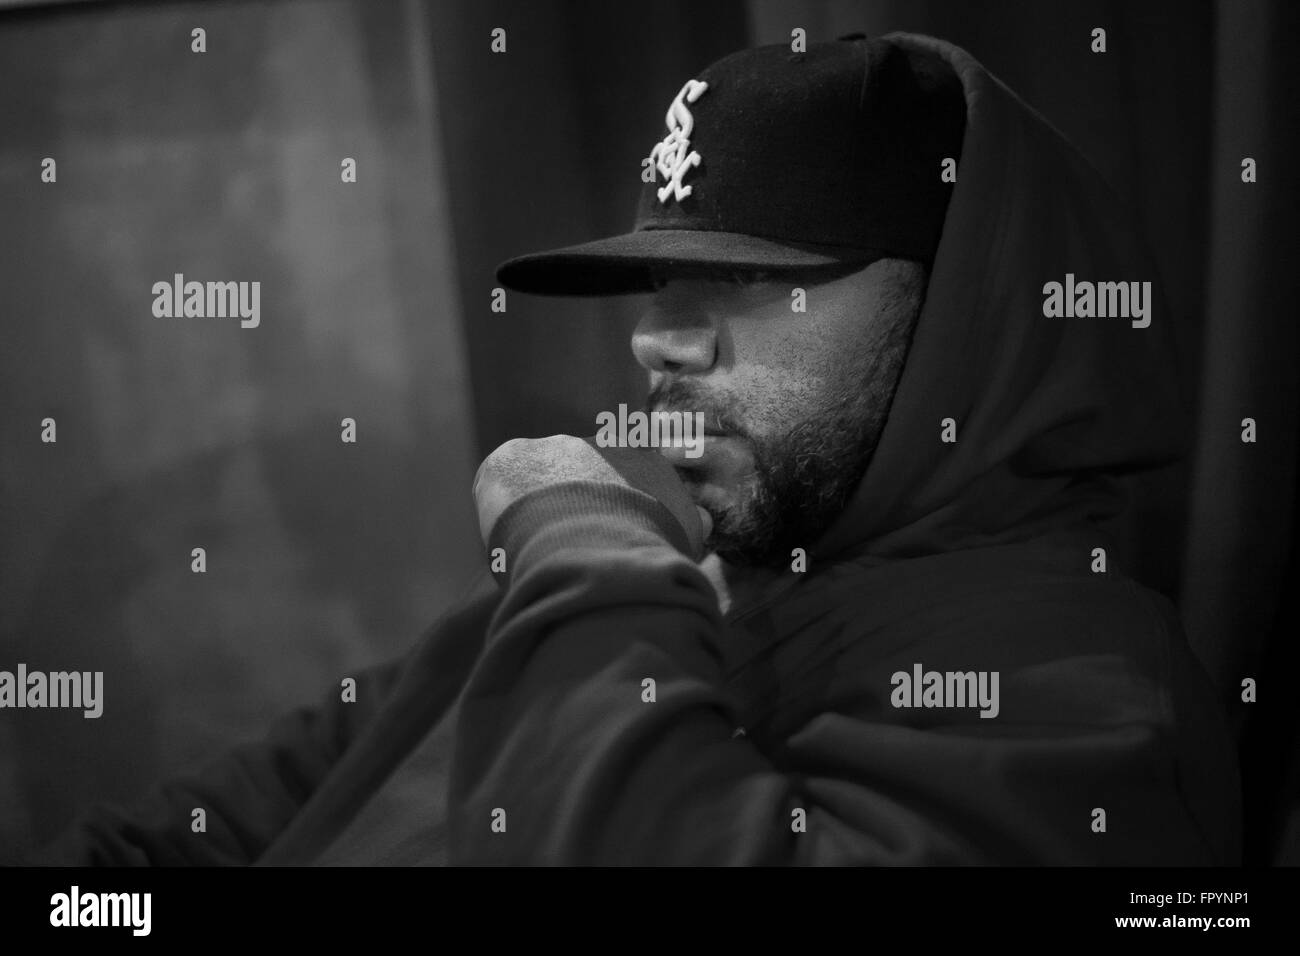 MOSCOW - 19 DECEMBER, 2015 : Concert of famous hip hop producer from Detroit, USA Erik Stephens known as Apollo Brown Stock Photo